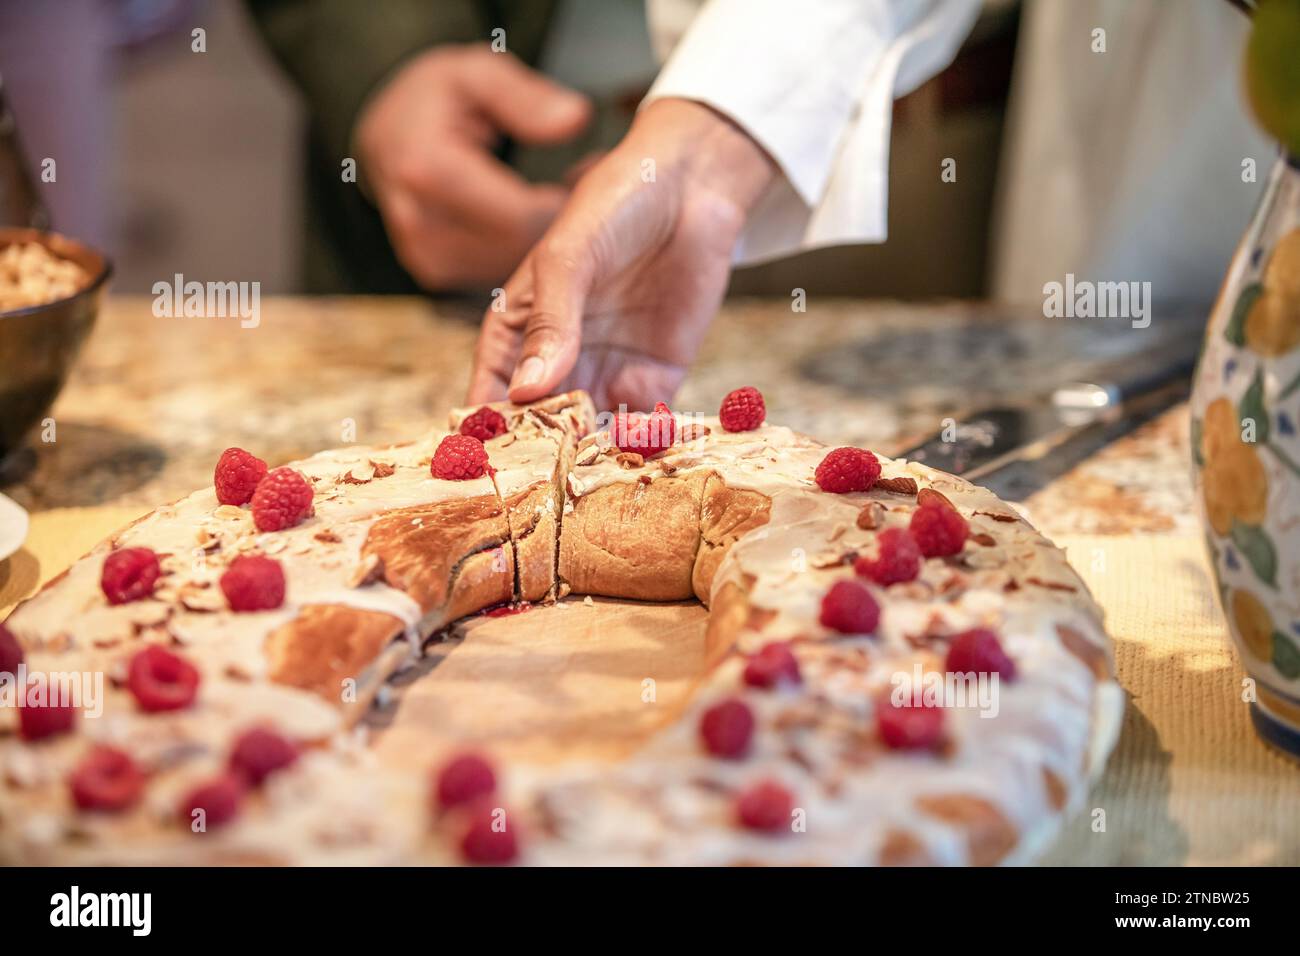 A woman reaches and takes a slice of delicious bread based pastry covered in raspberries and almonds at a wedding reception and tea Stock Photo